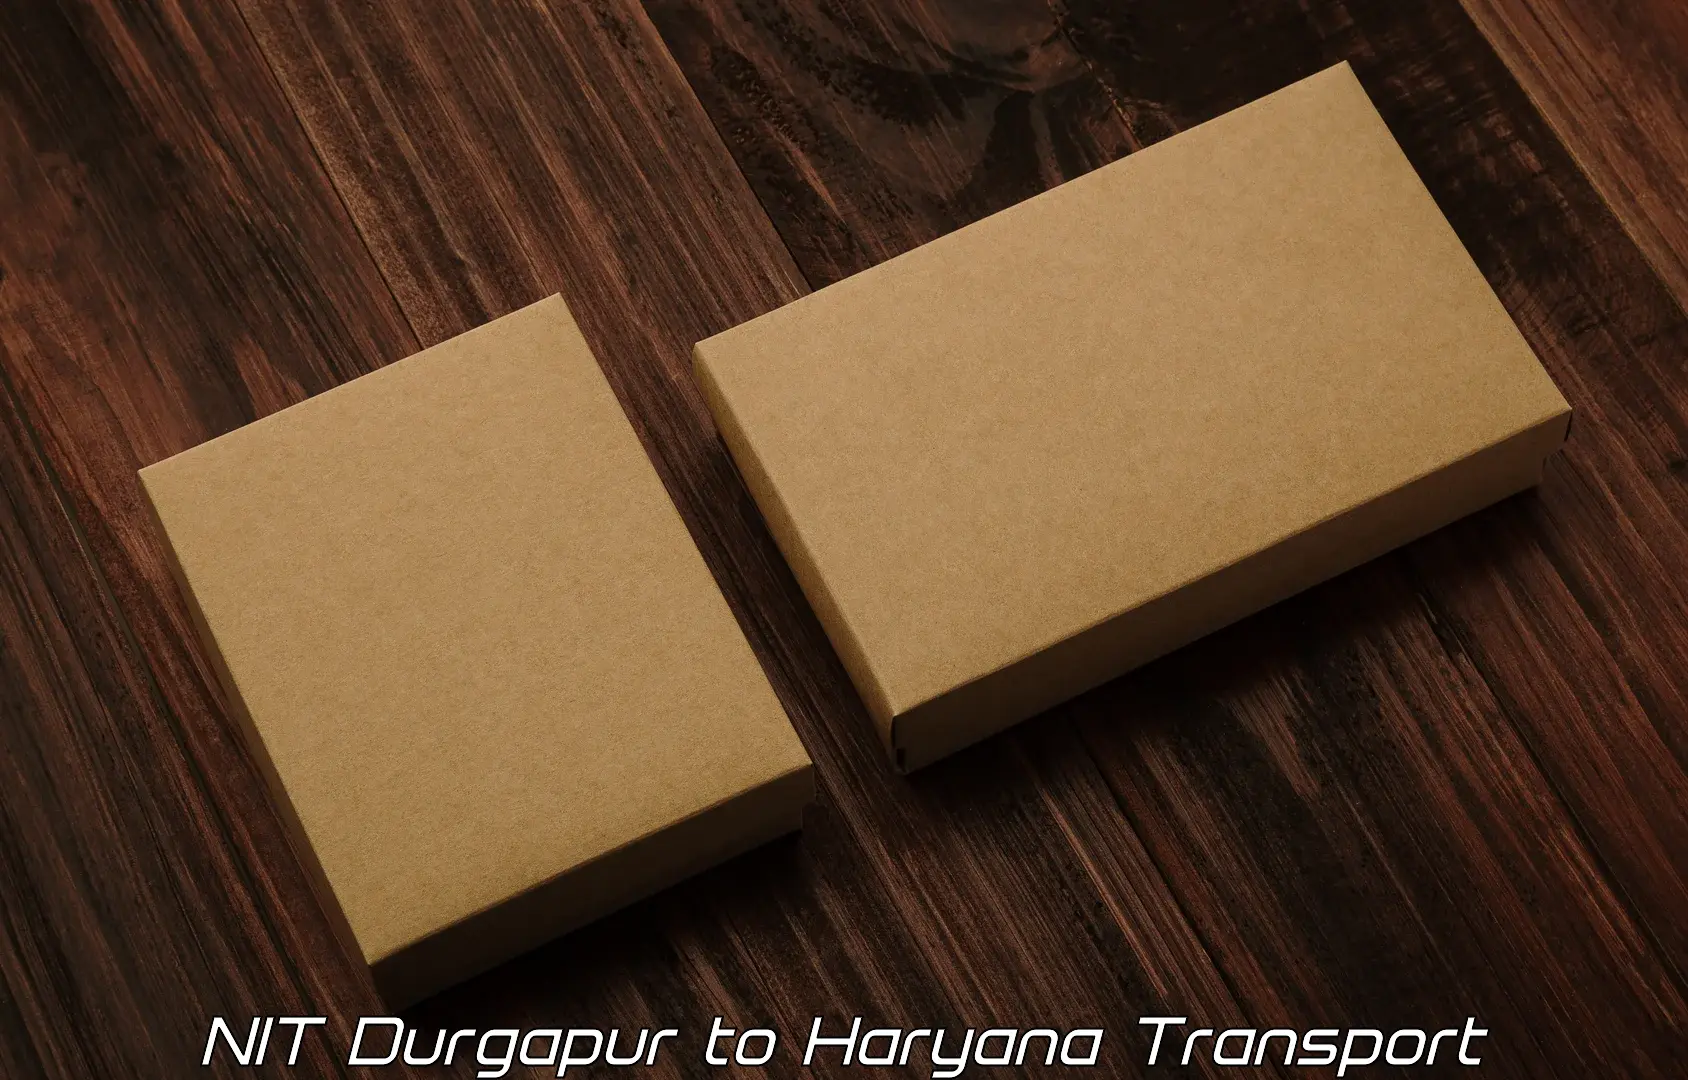 Truck transport companies in India in NIT Durgapur to Faridabad